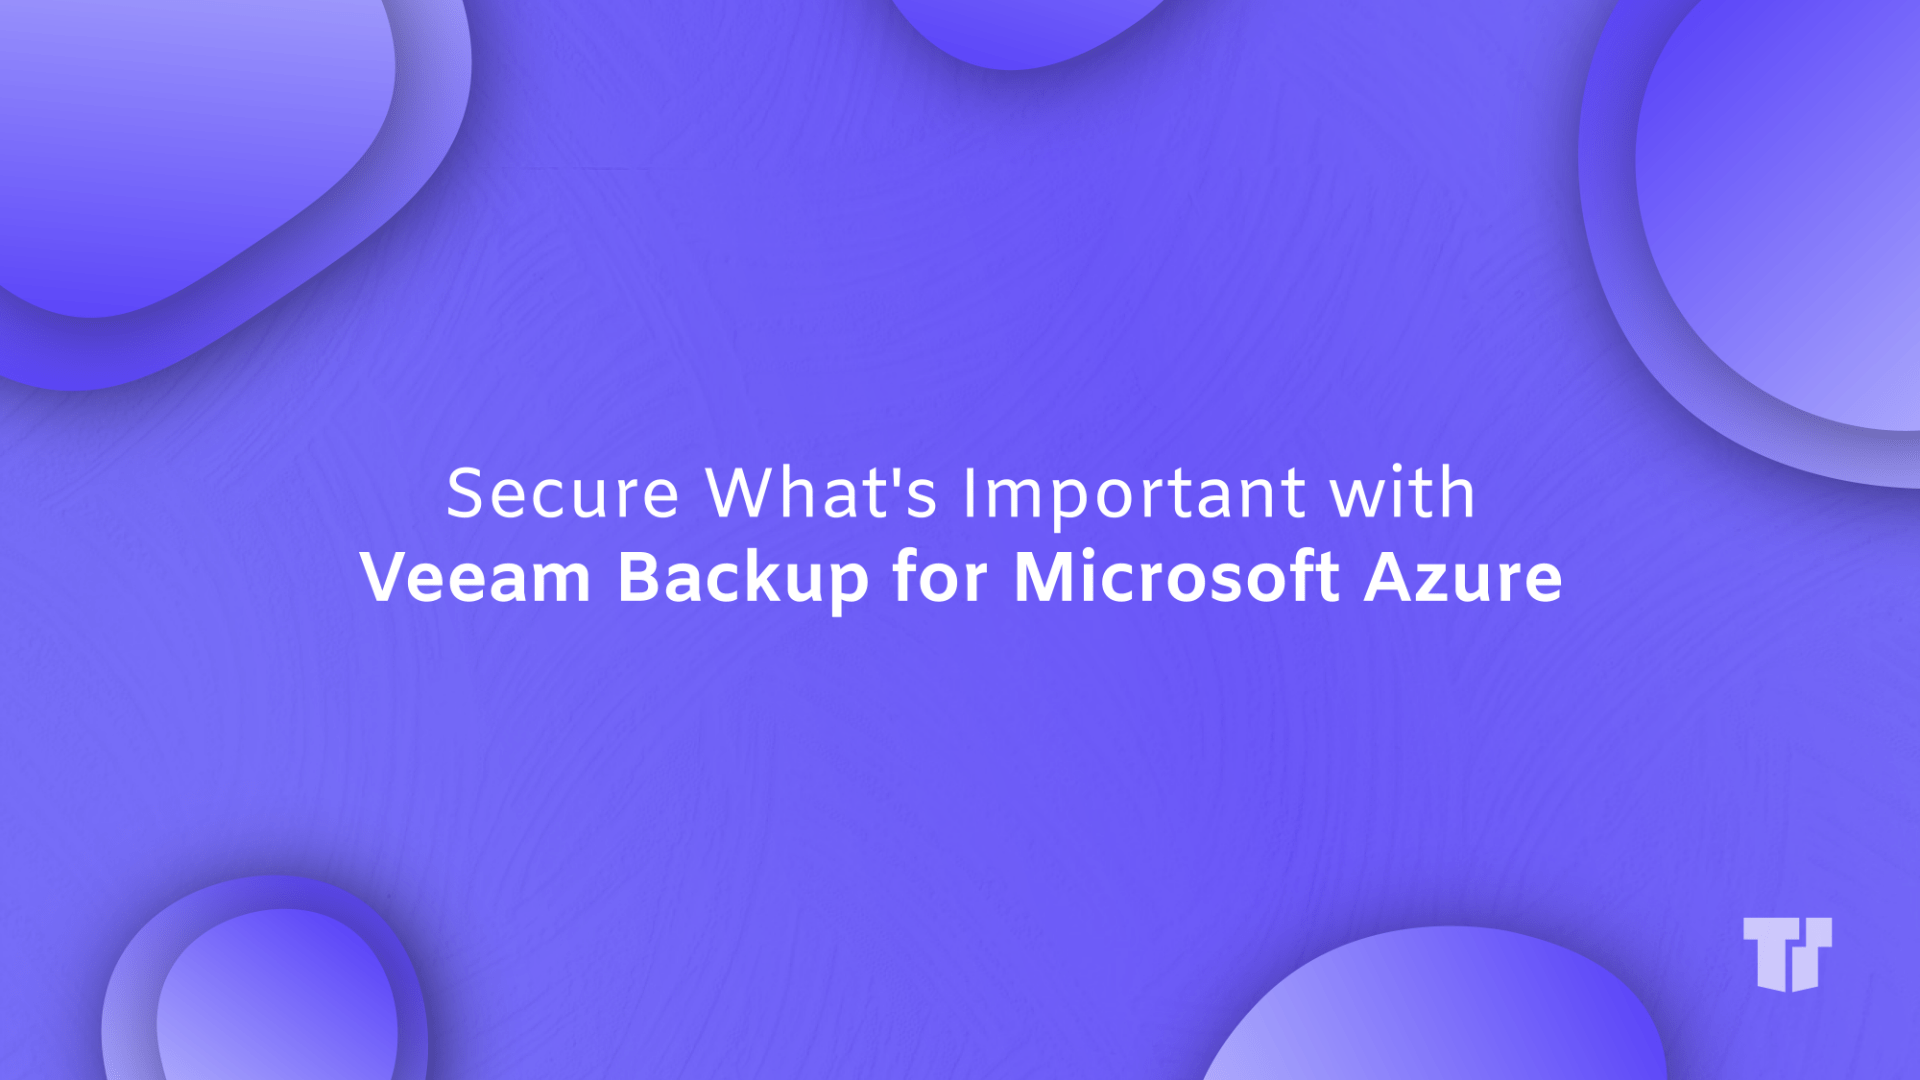 Secure What's Important with Veeam Backup for Azure cover image